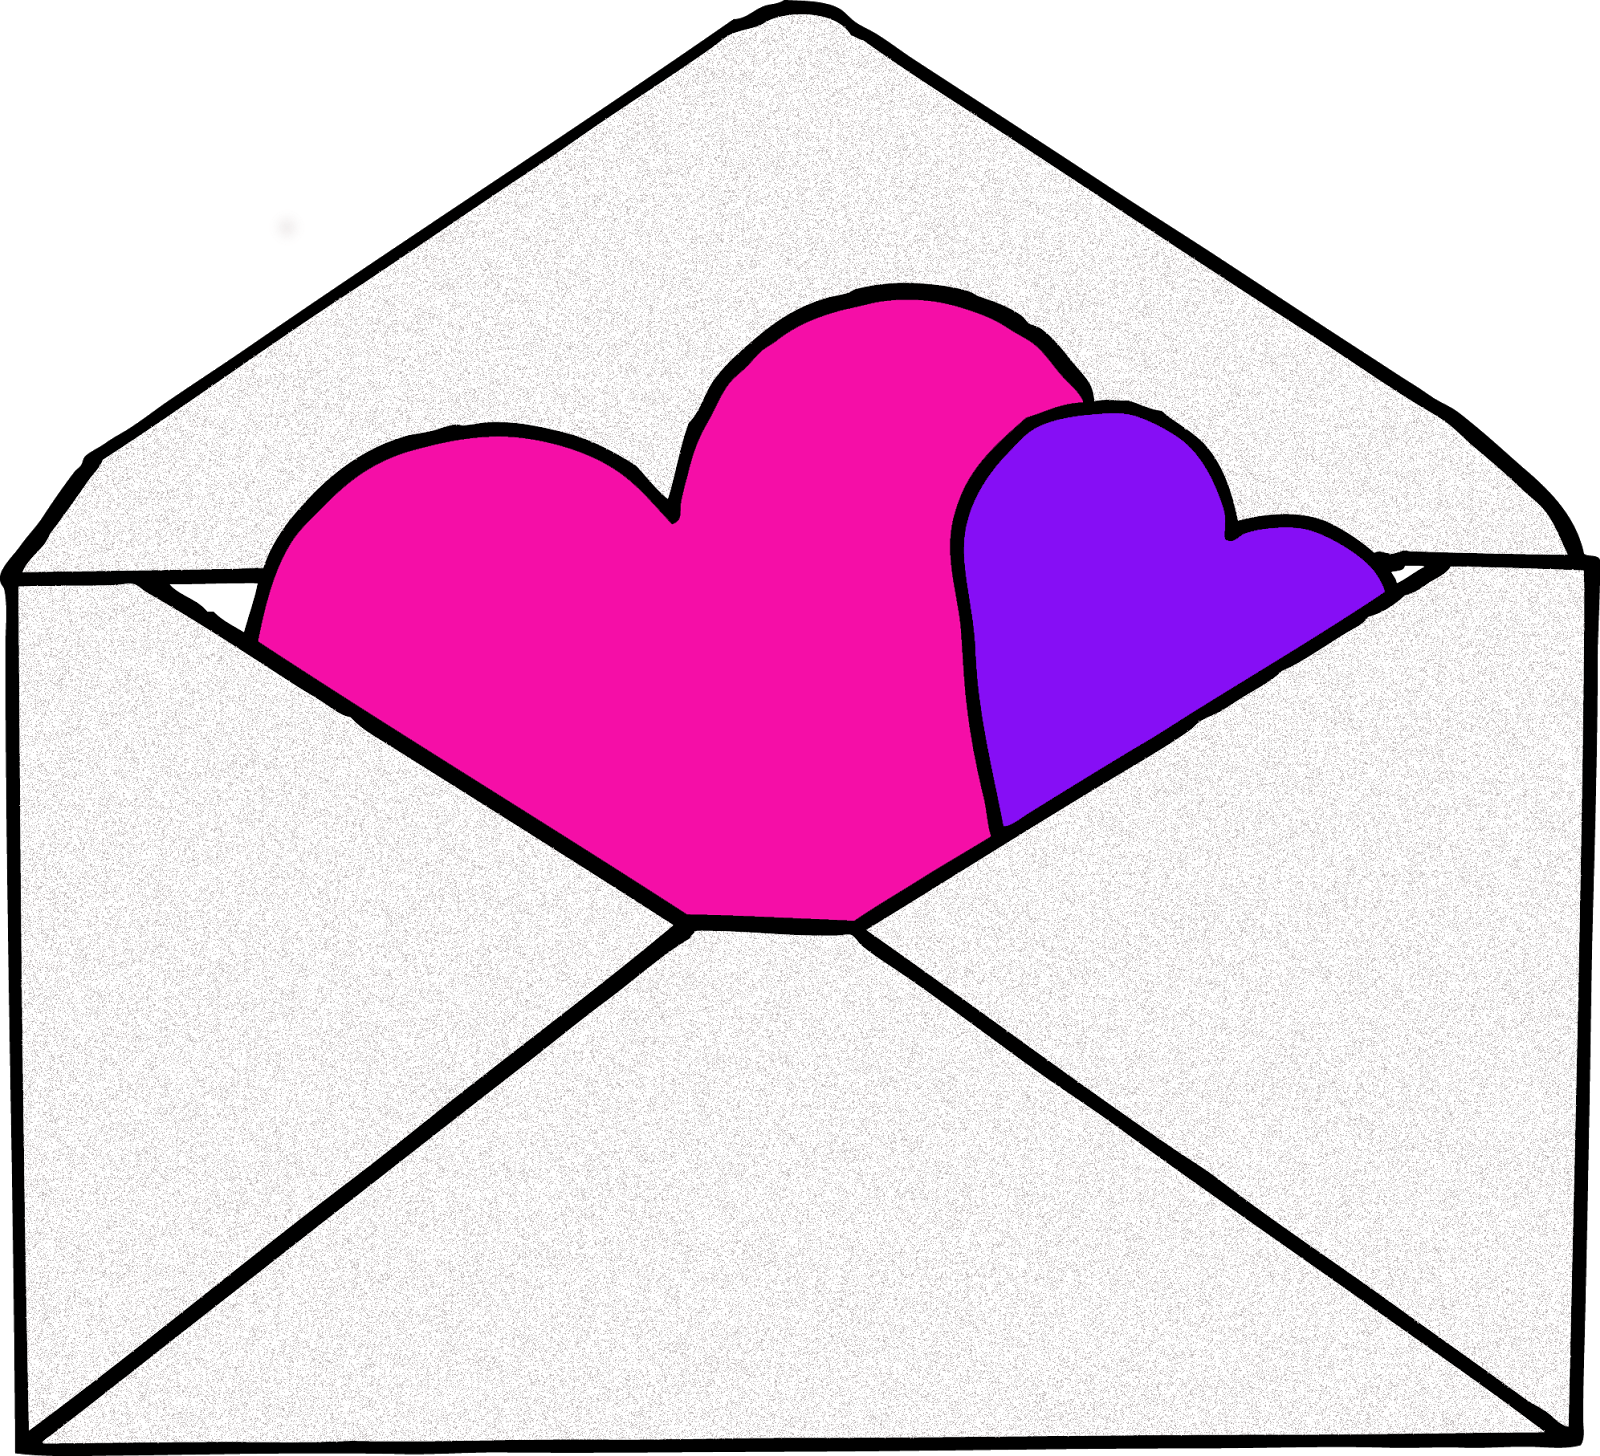 clipart of envelope - photo #25